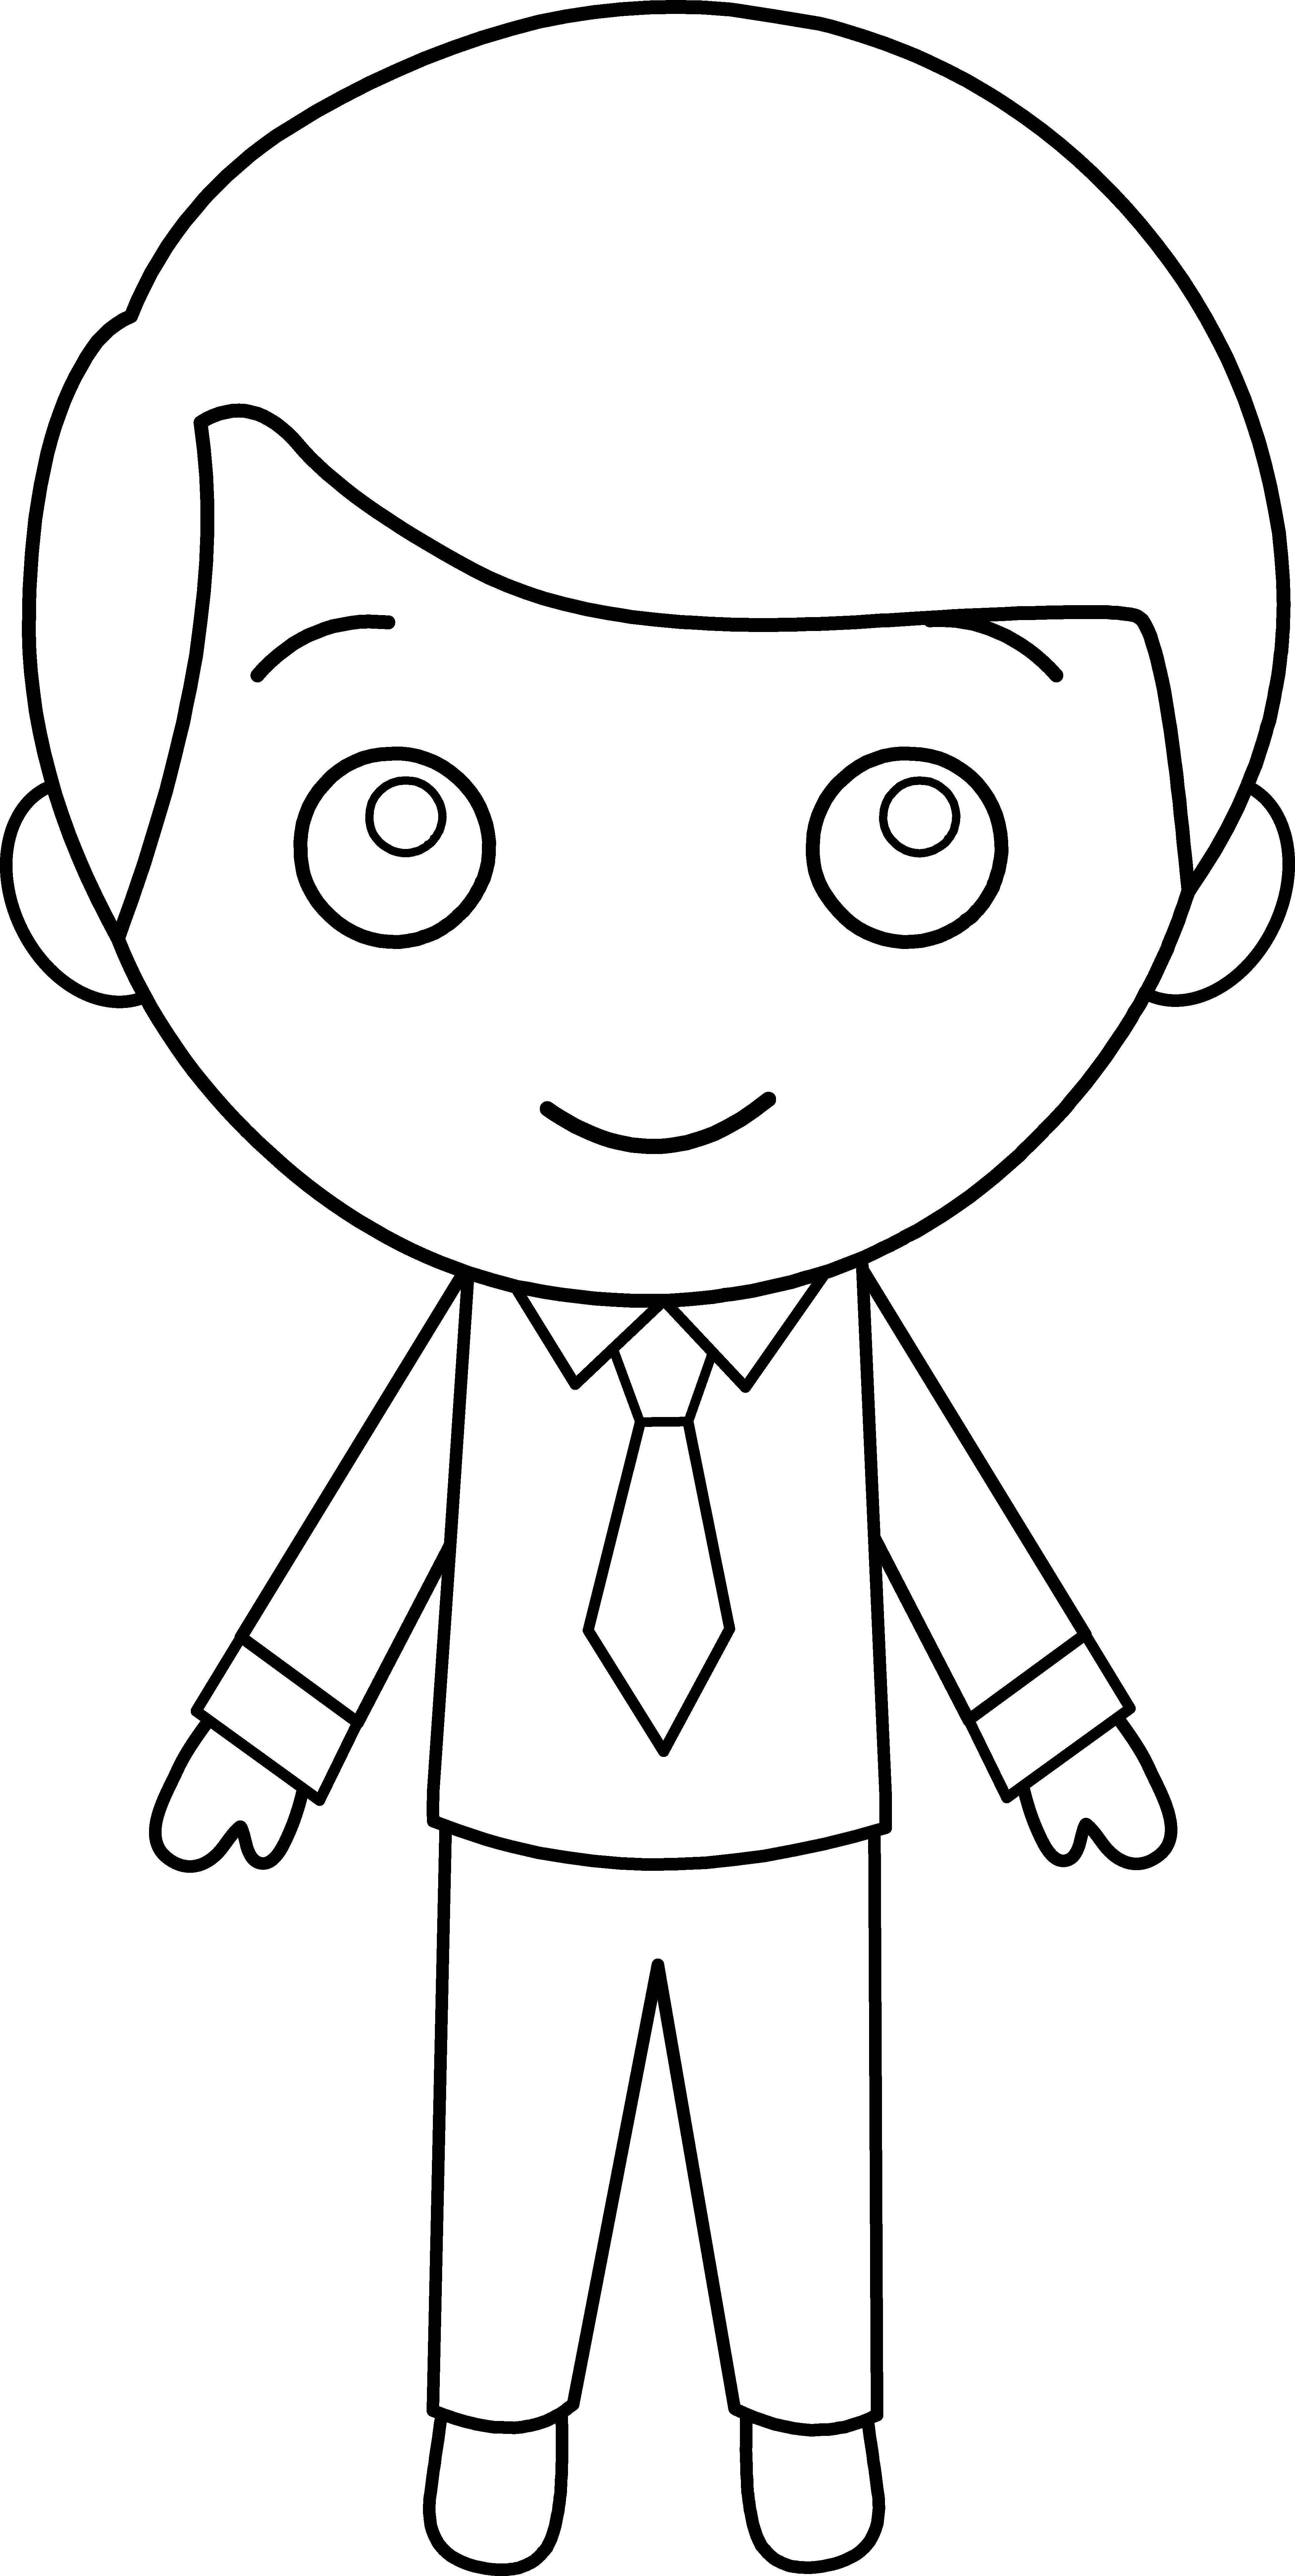 Images For > Boy Black And White Clipart